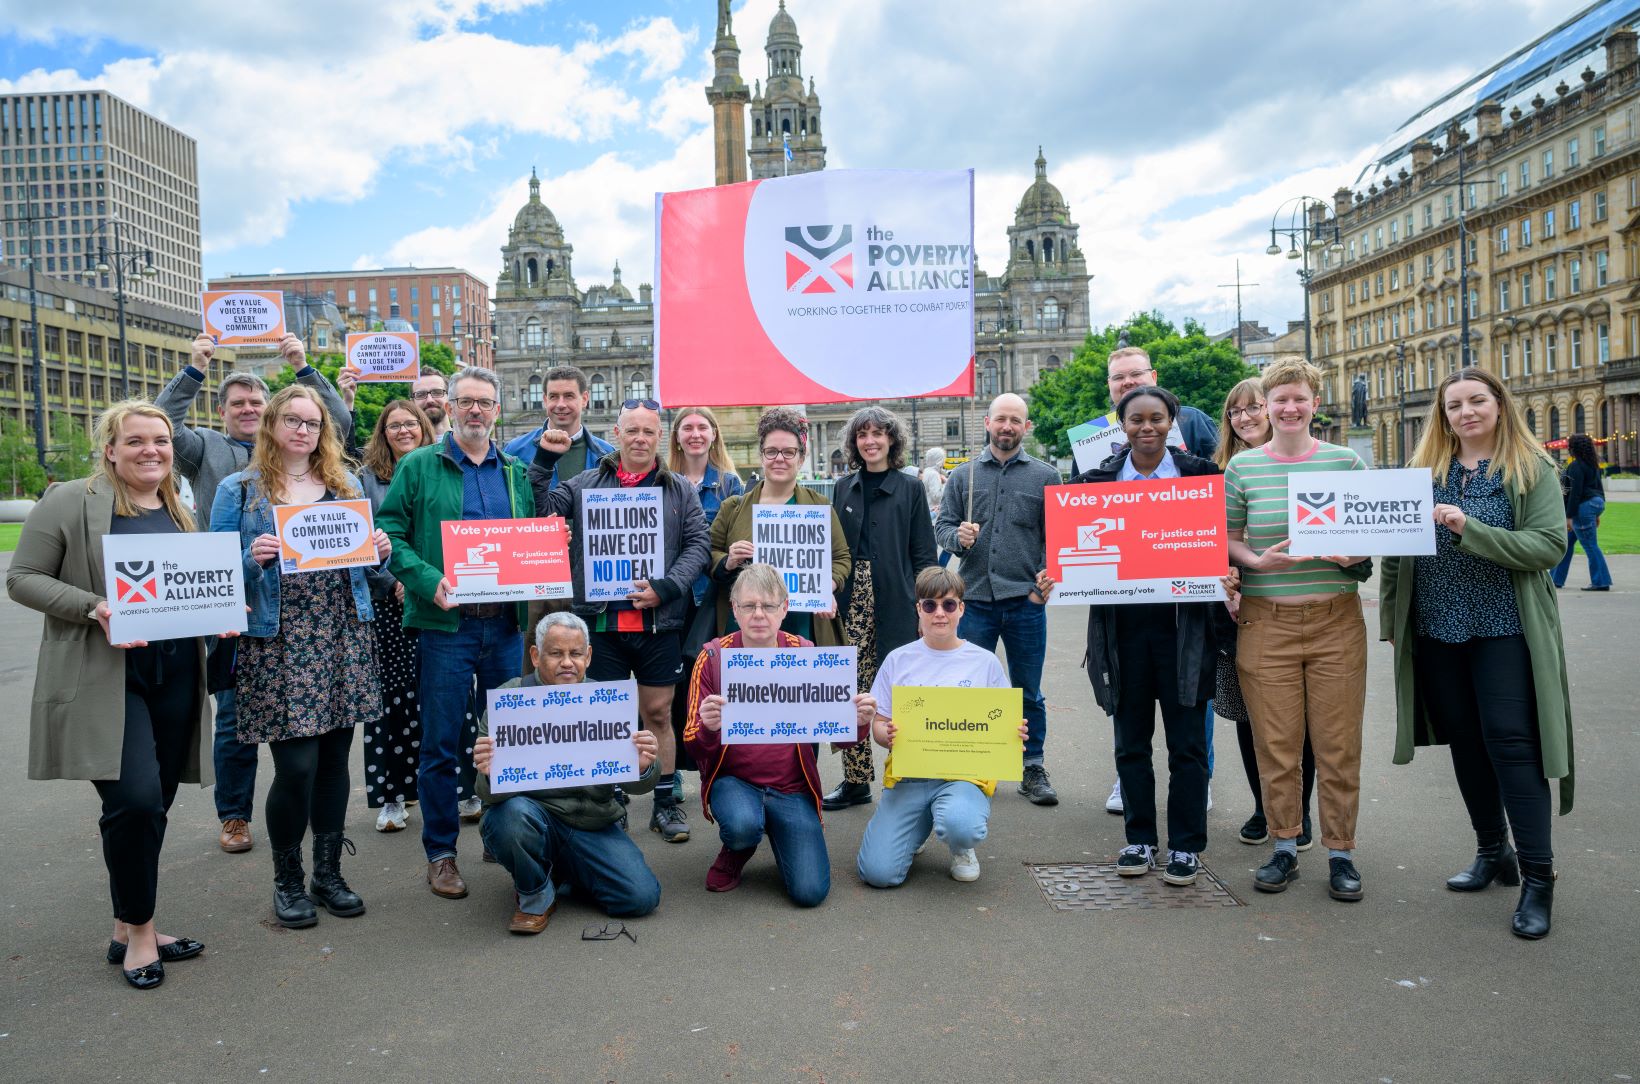 Poverty Alliance members take part in a #VoteYourValues photocall